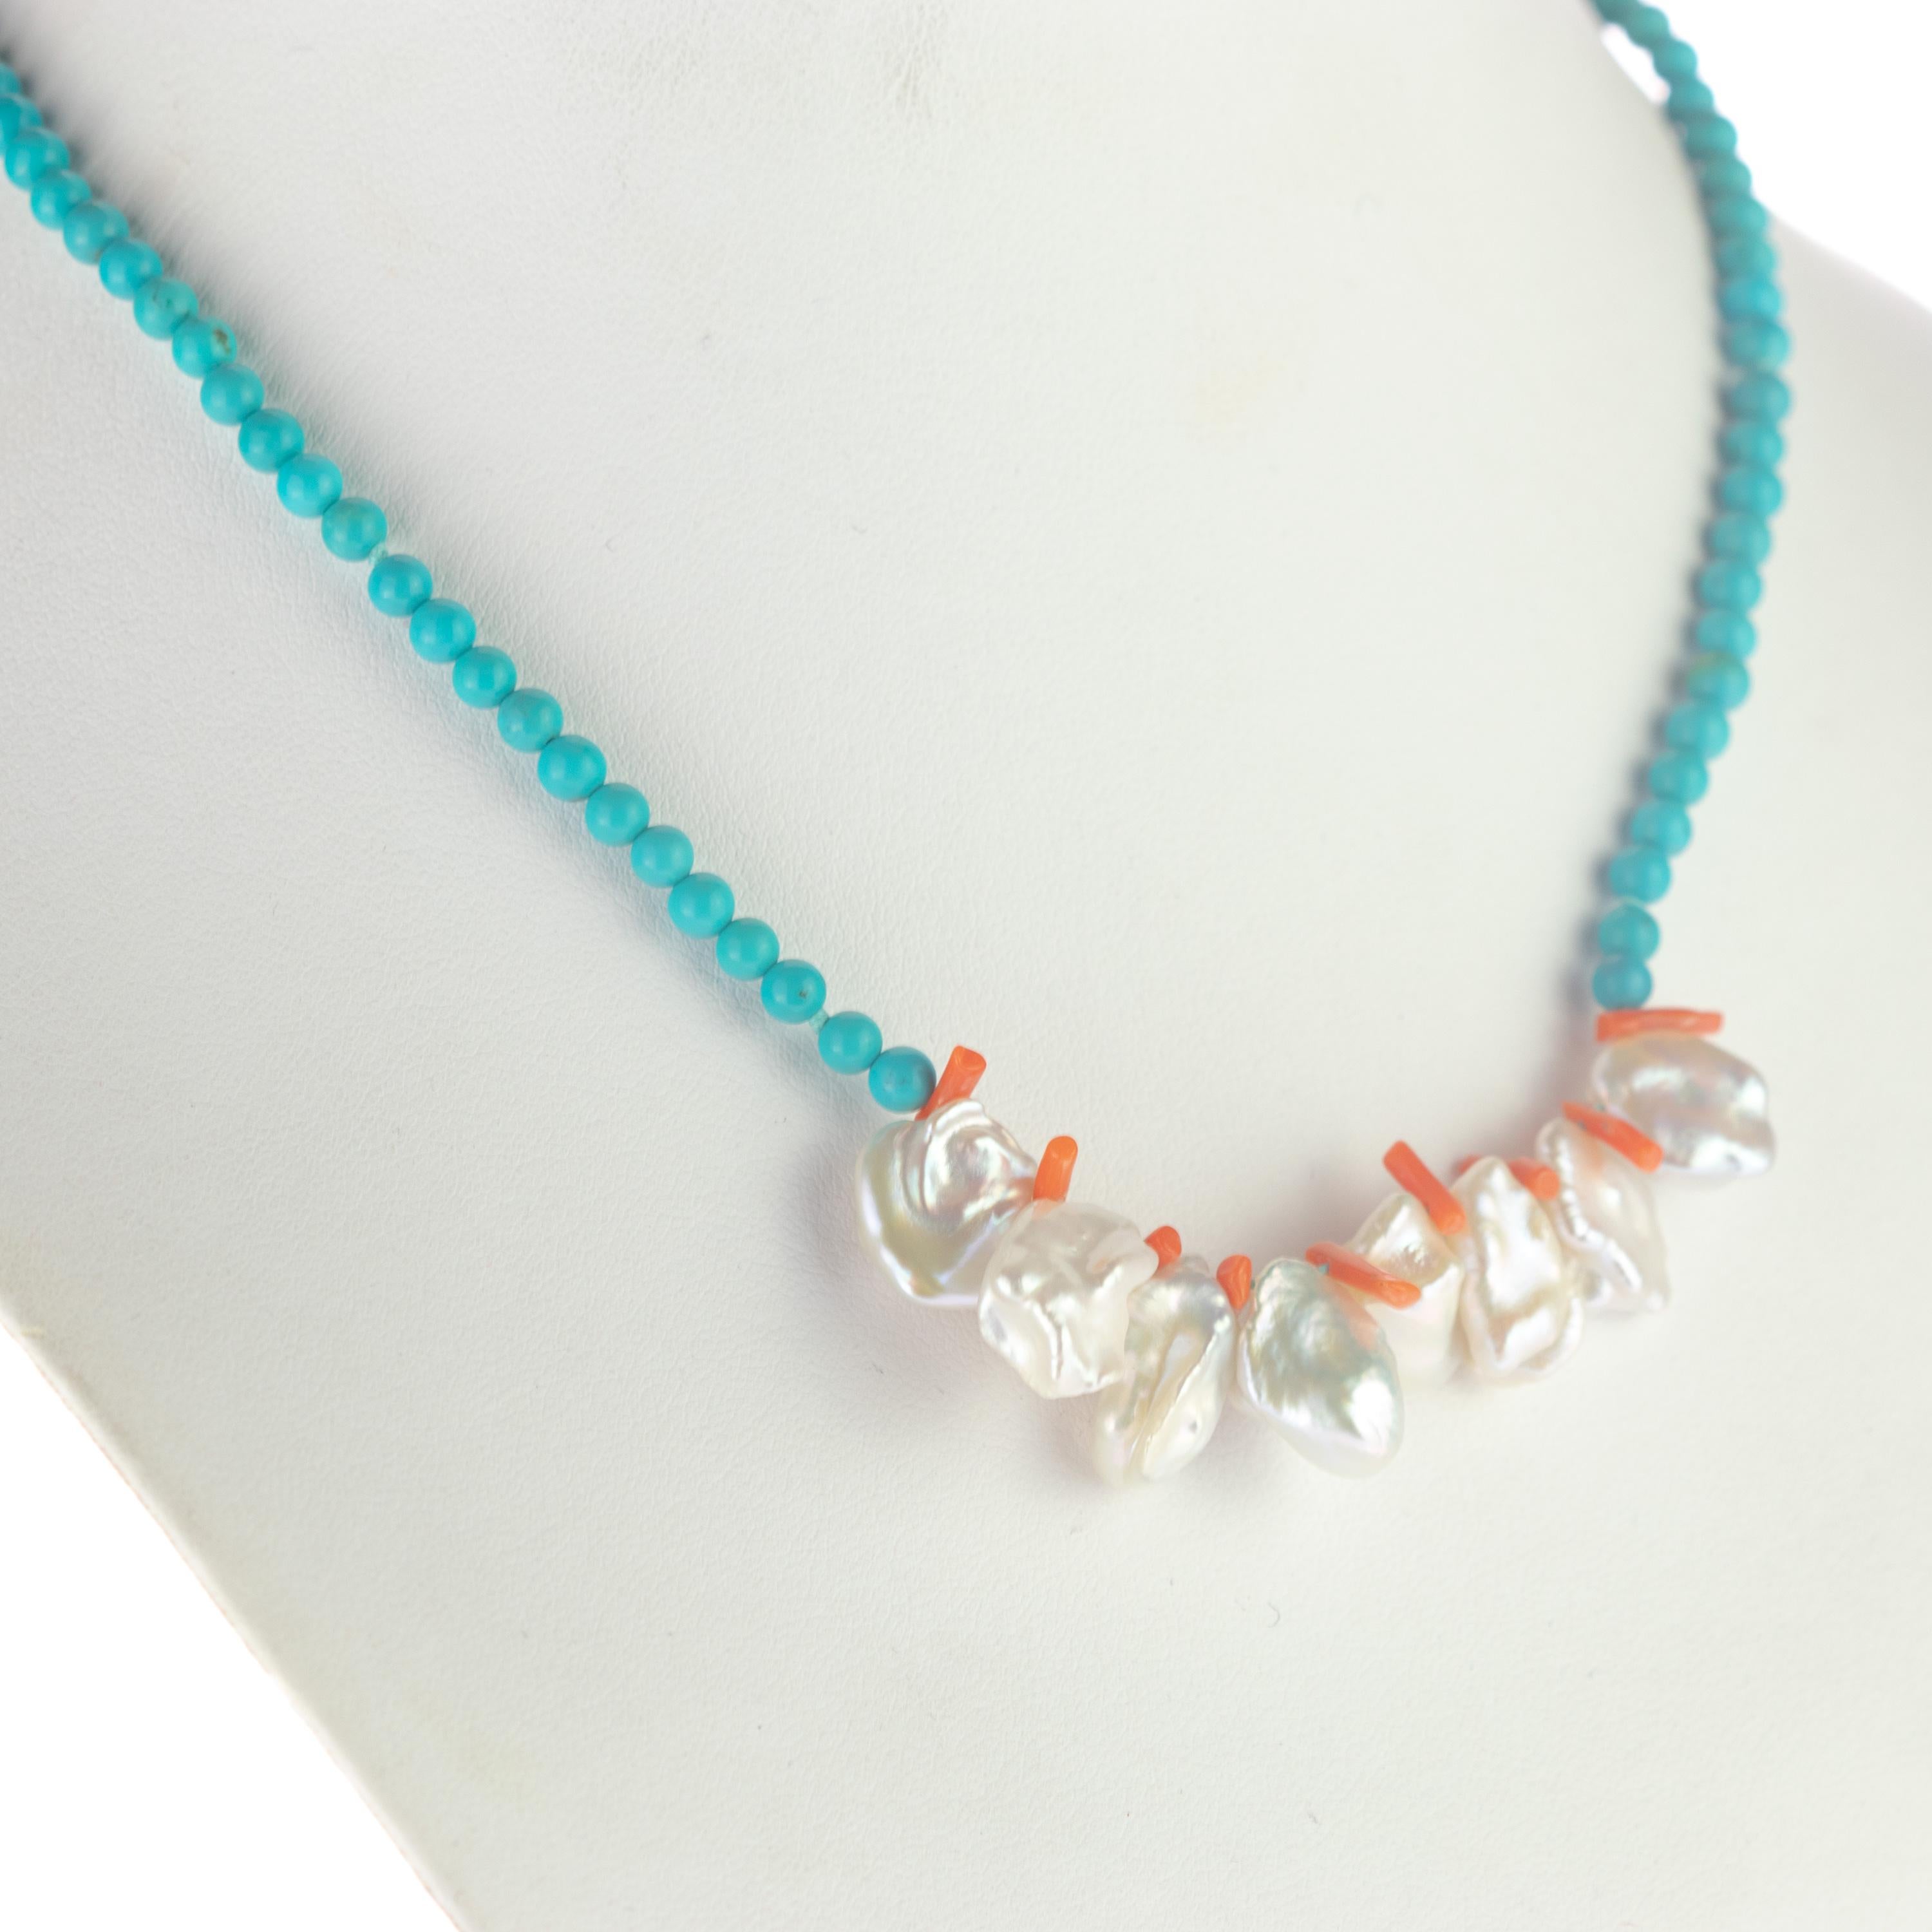 A delicate strand of turquoise beads with central mother of pearl and coral chips necklace. Immerse yourself in the beauty of this uniquely designed necklace with natural stones full of life and color. A hawaiian inspirational jewel which will match